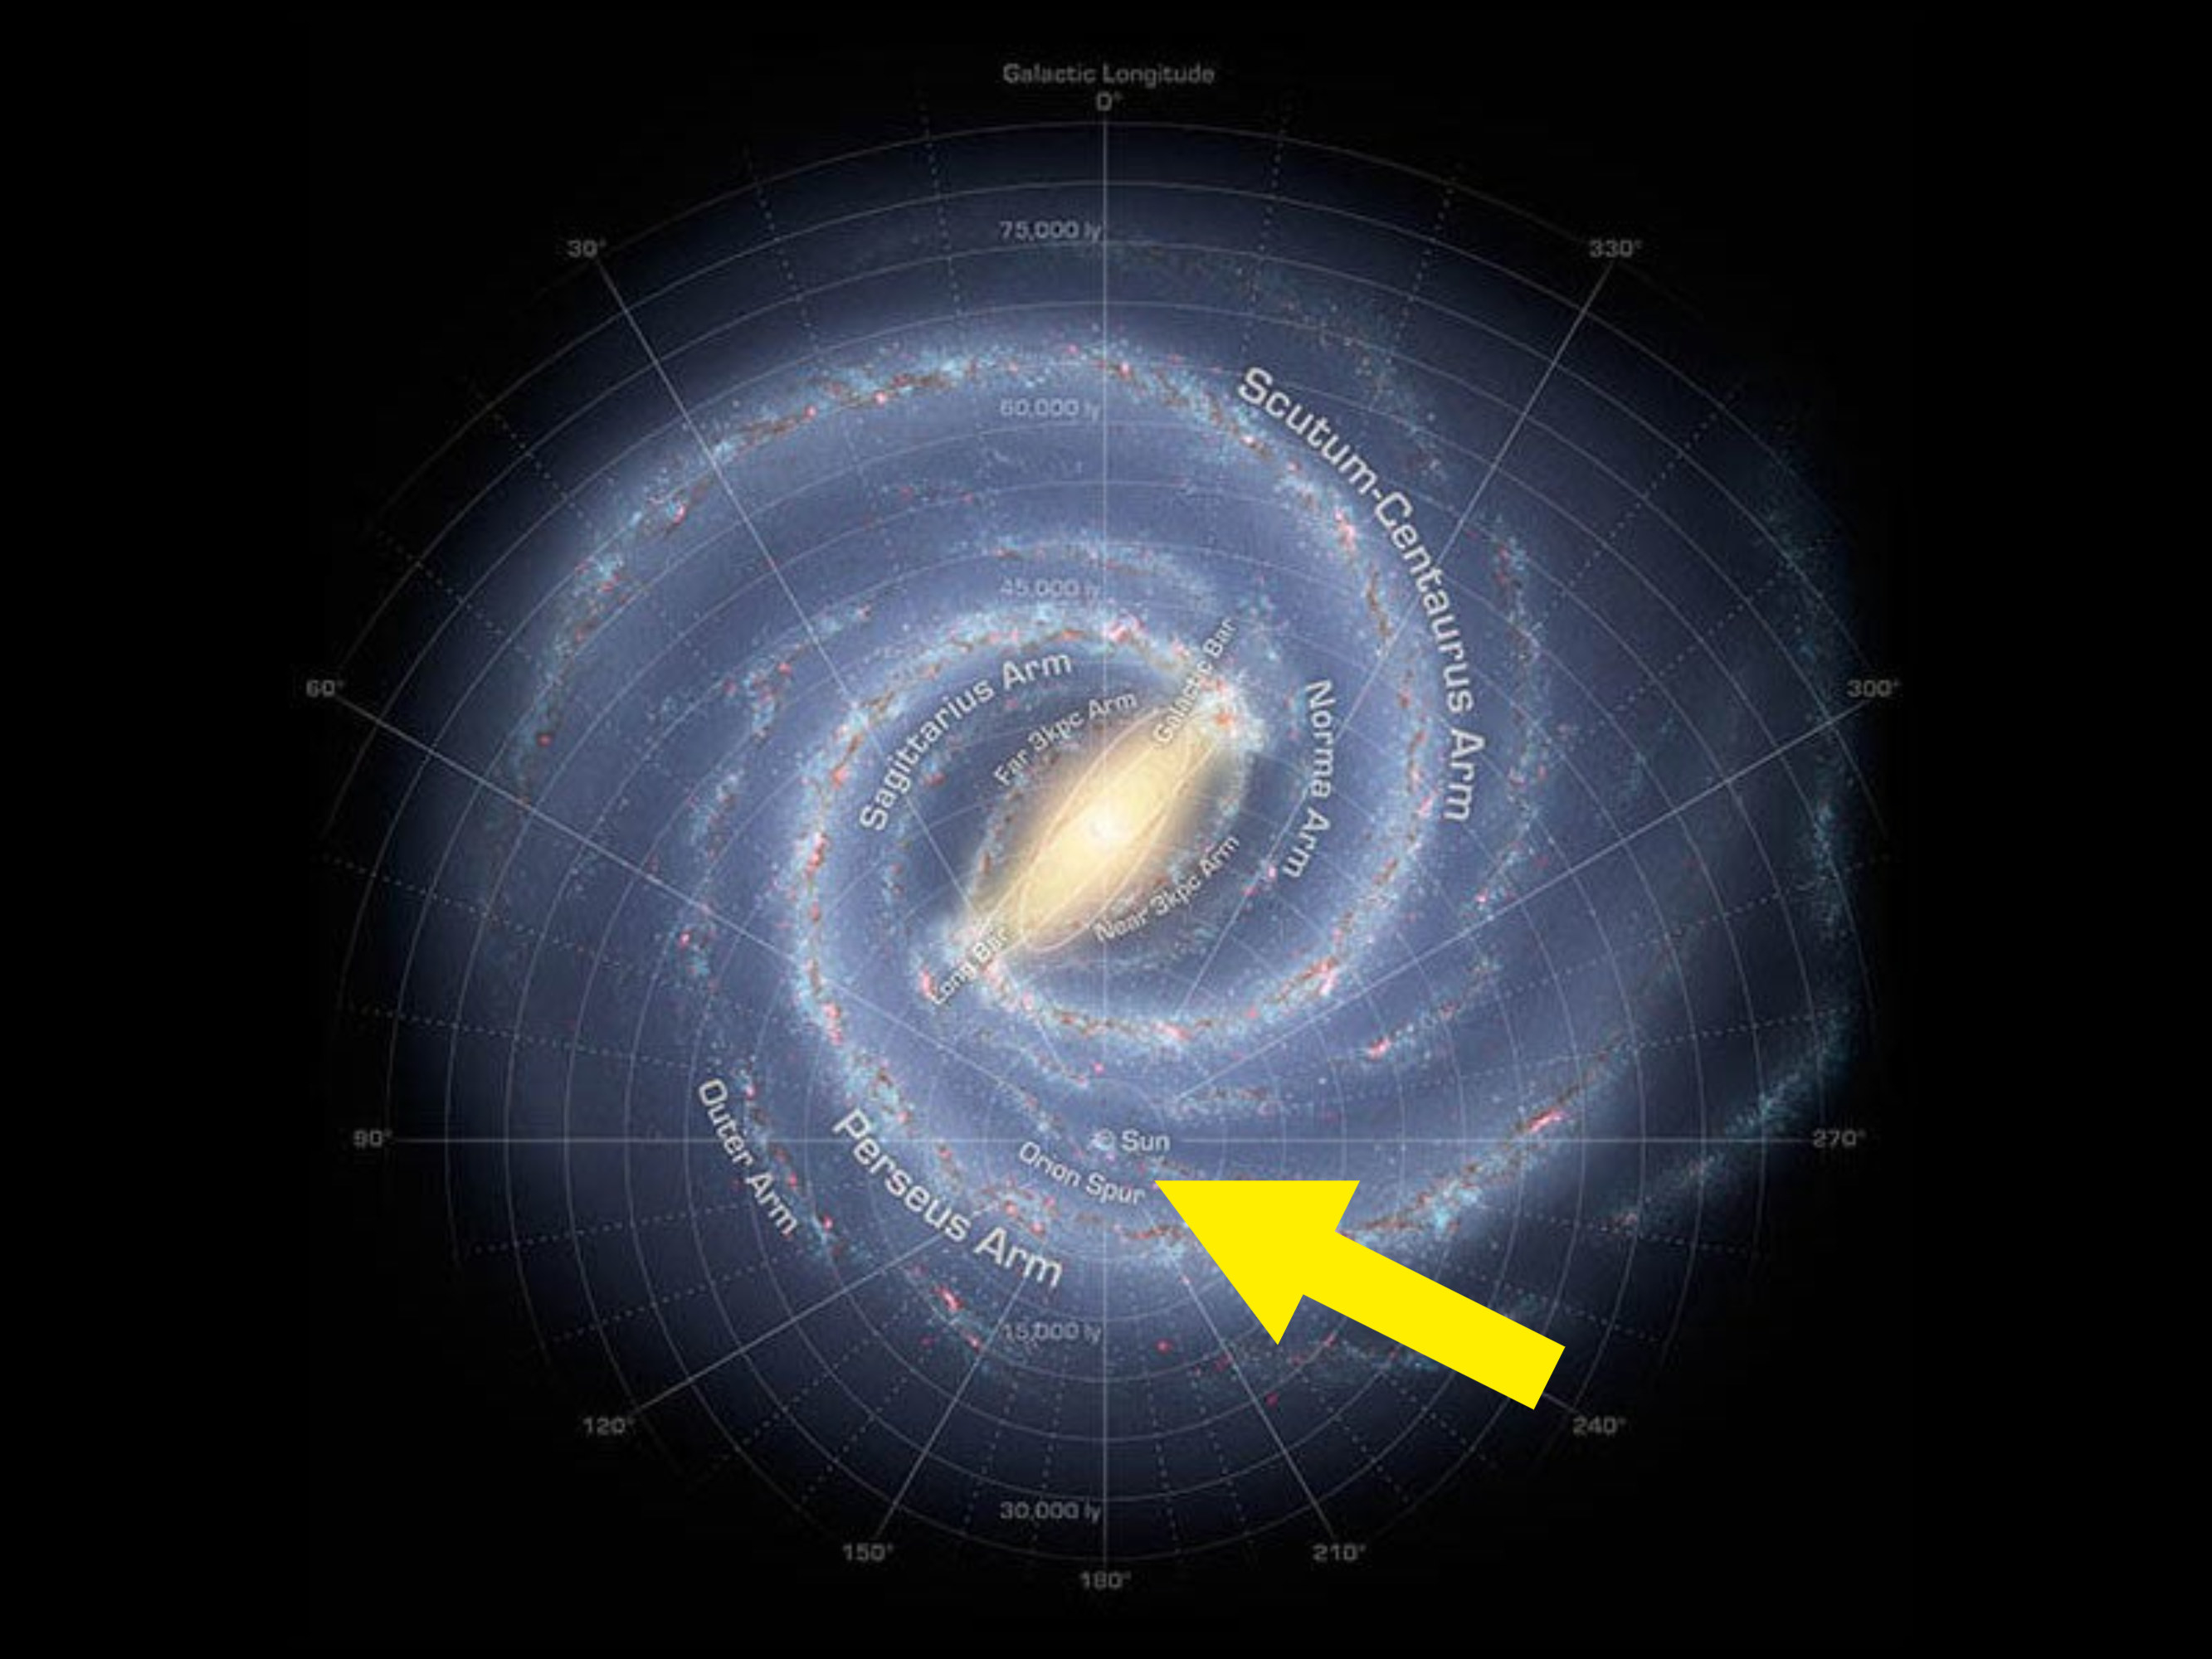 Another arrow shows the relative location of our solar system, which is away from the glowing center of the galaxy and in one of the arms spiraling outside it